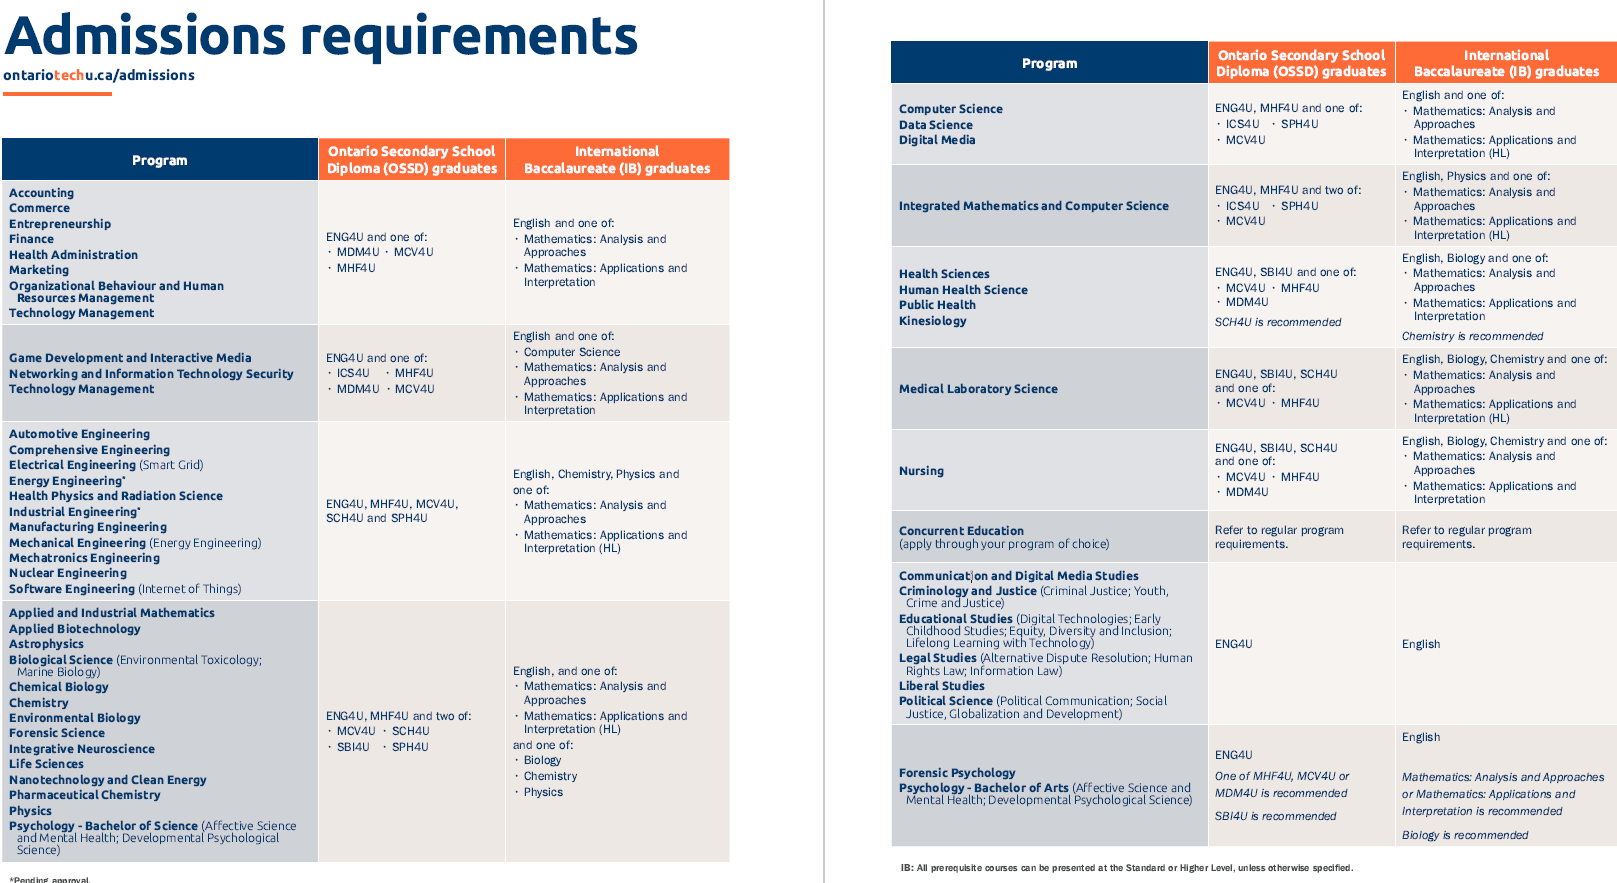 admissions requirements chart